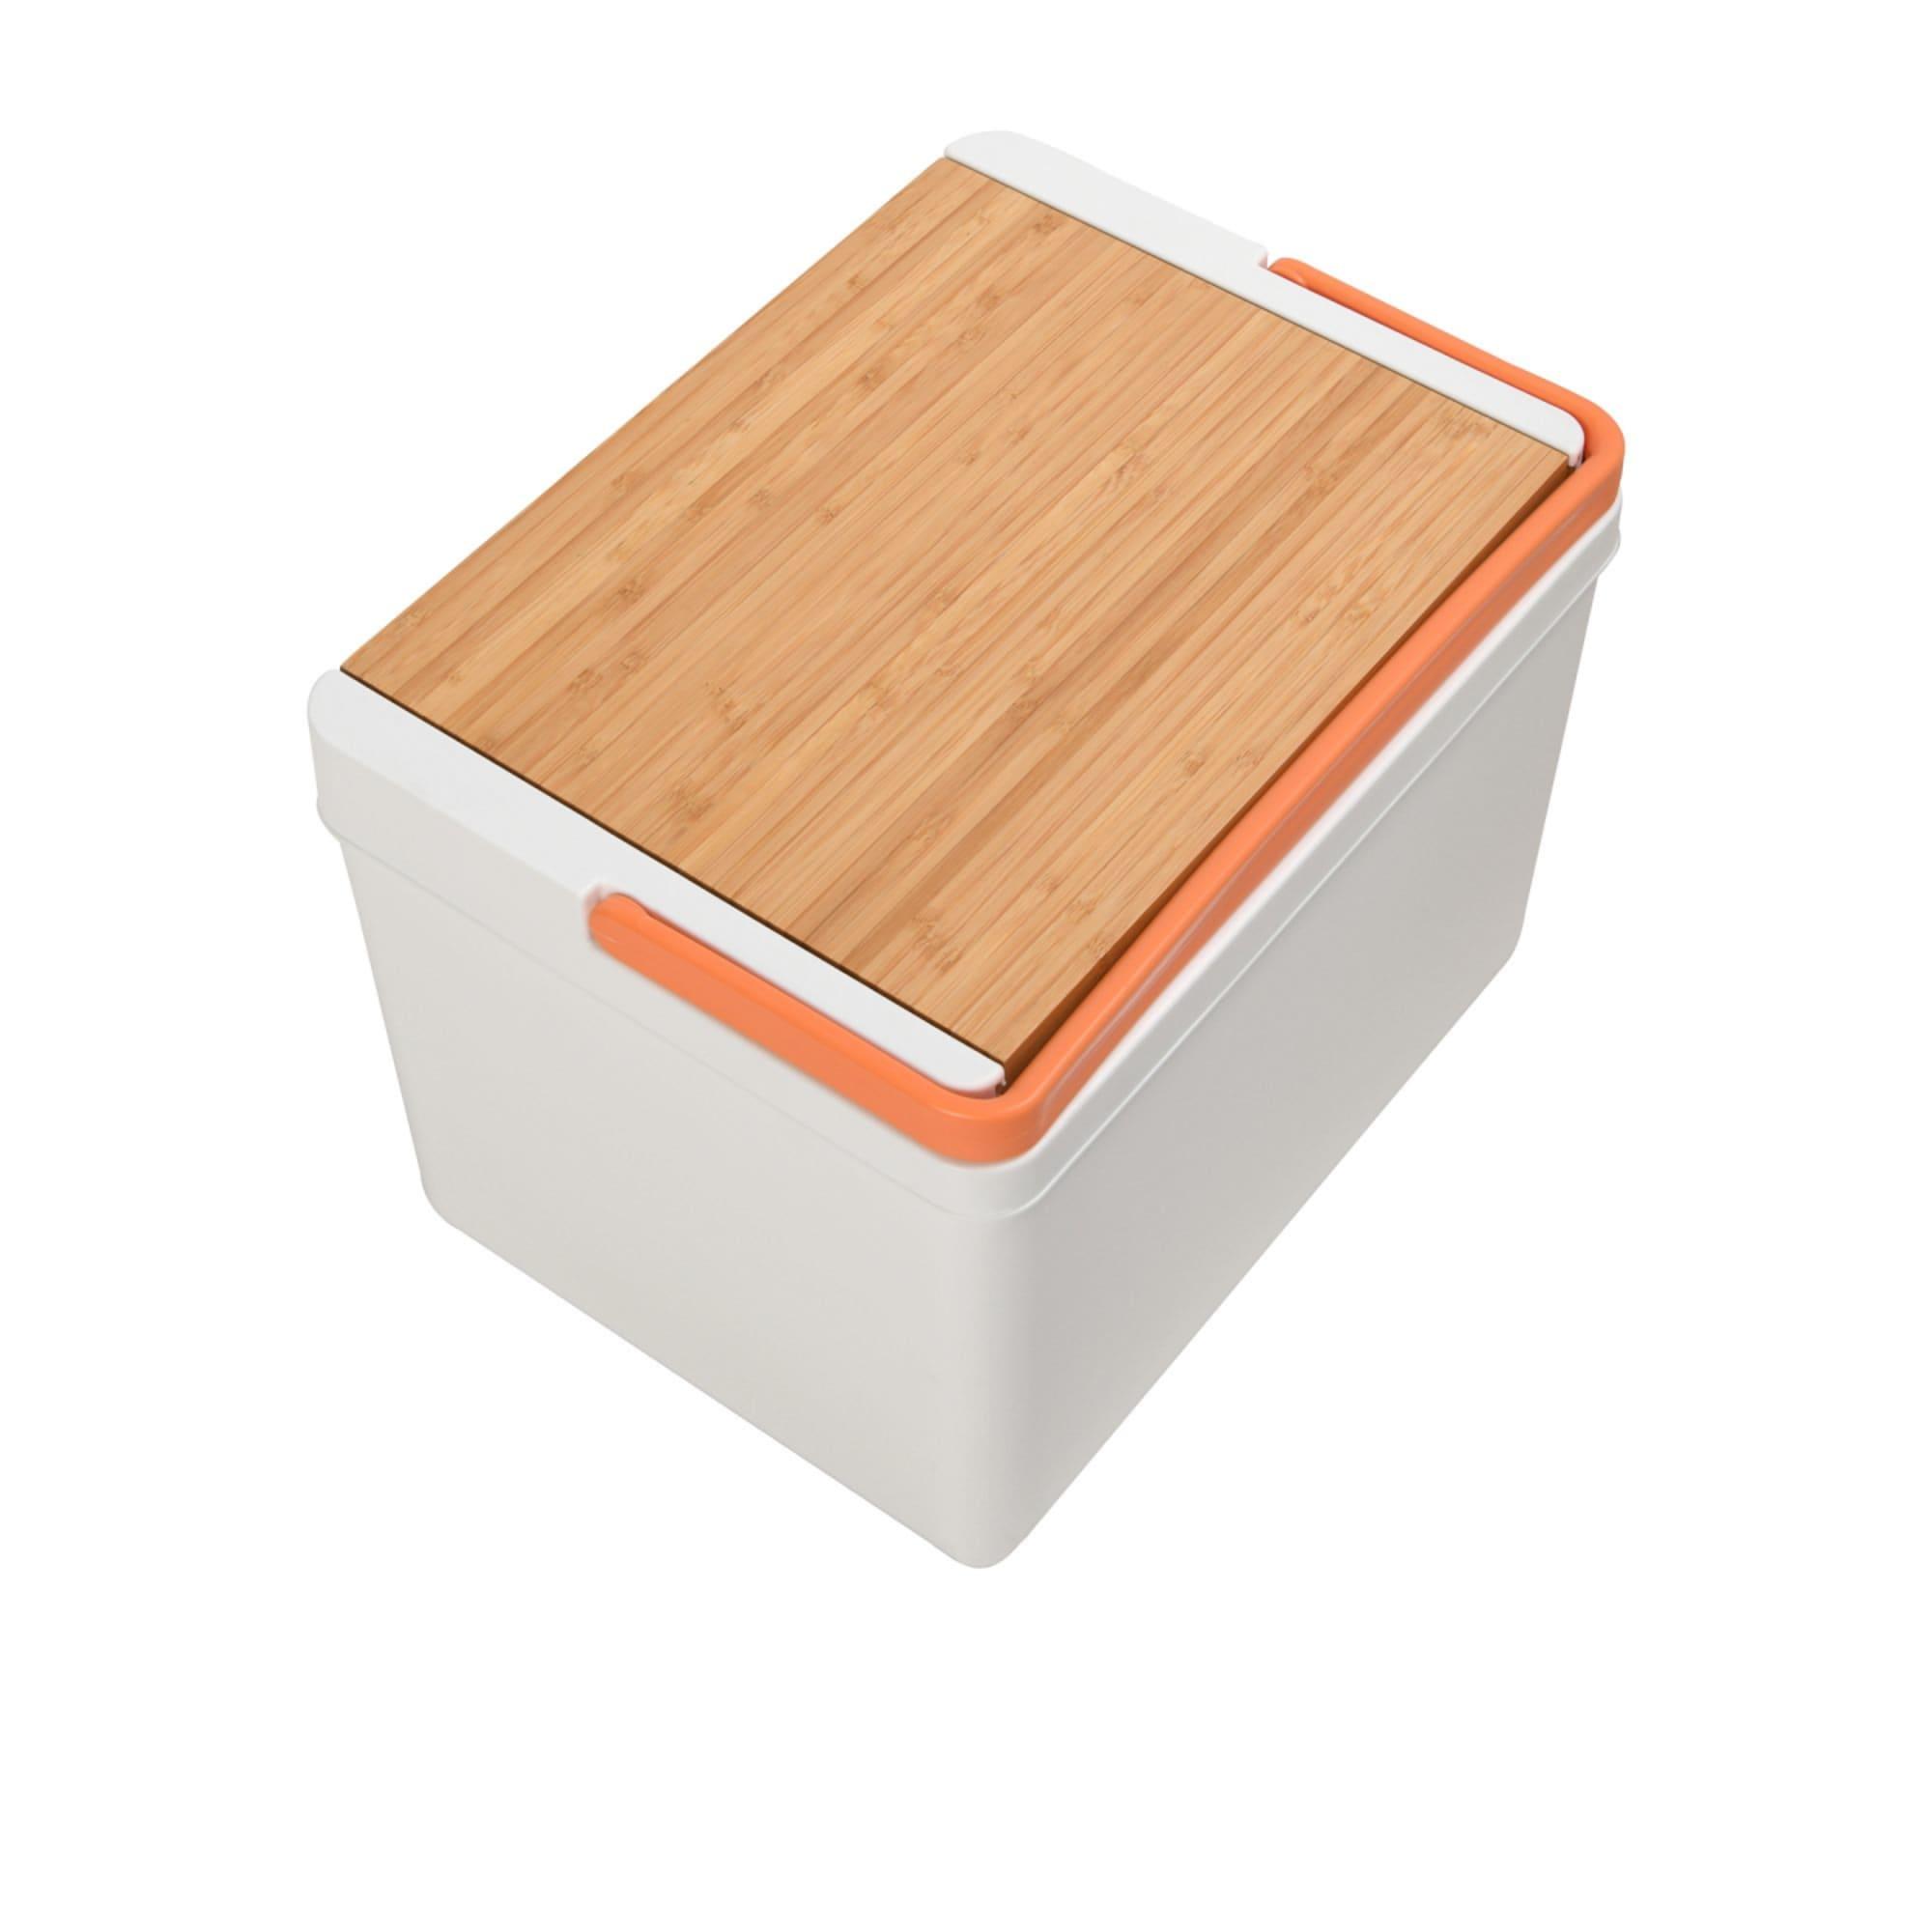 Vibes Portable Cooler Box With Bamboo Lid White Peach Image 3